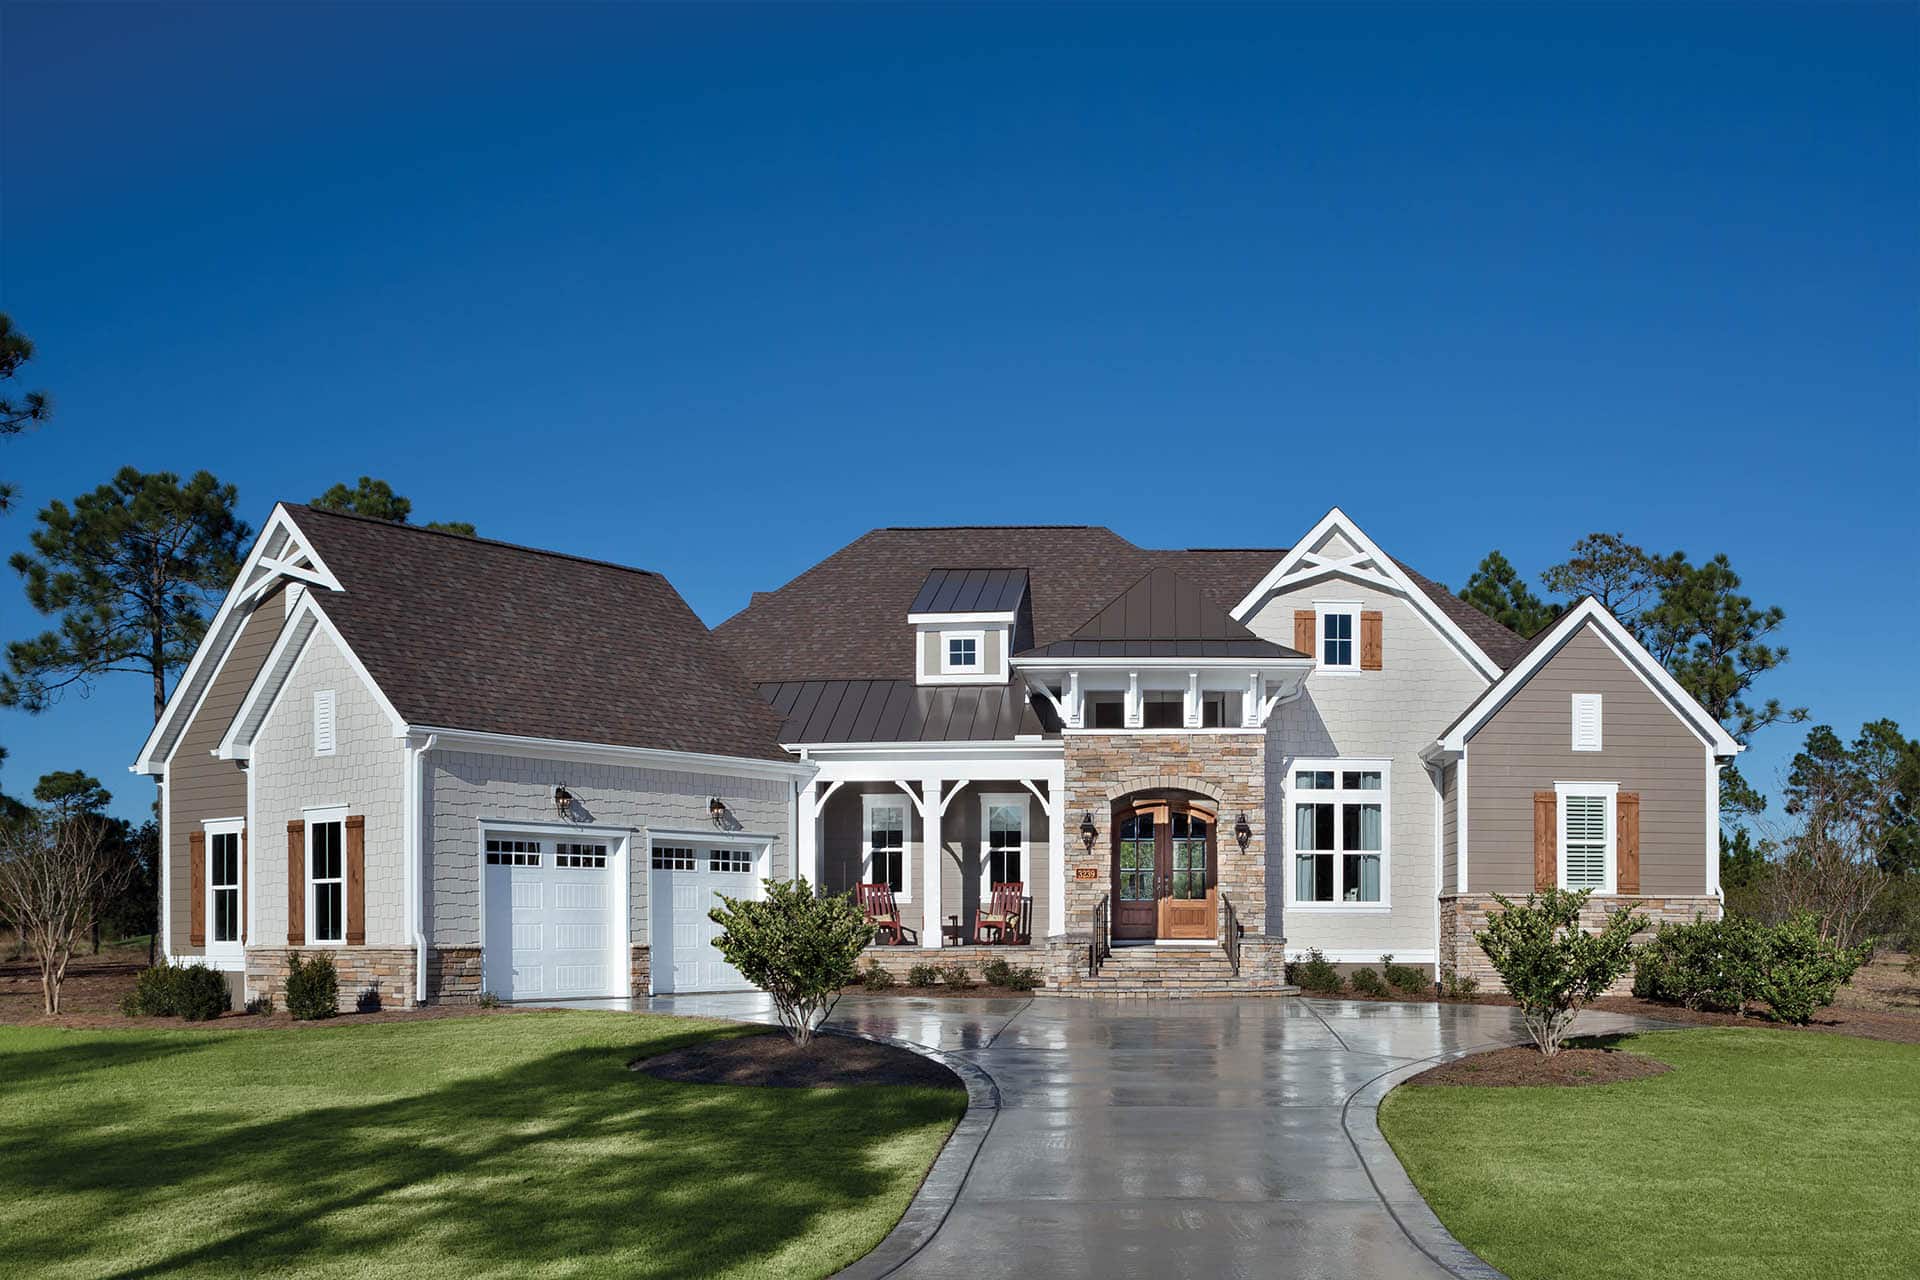 Exterior of wrightsville model home